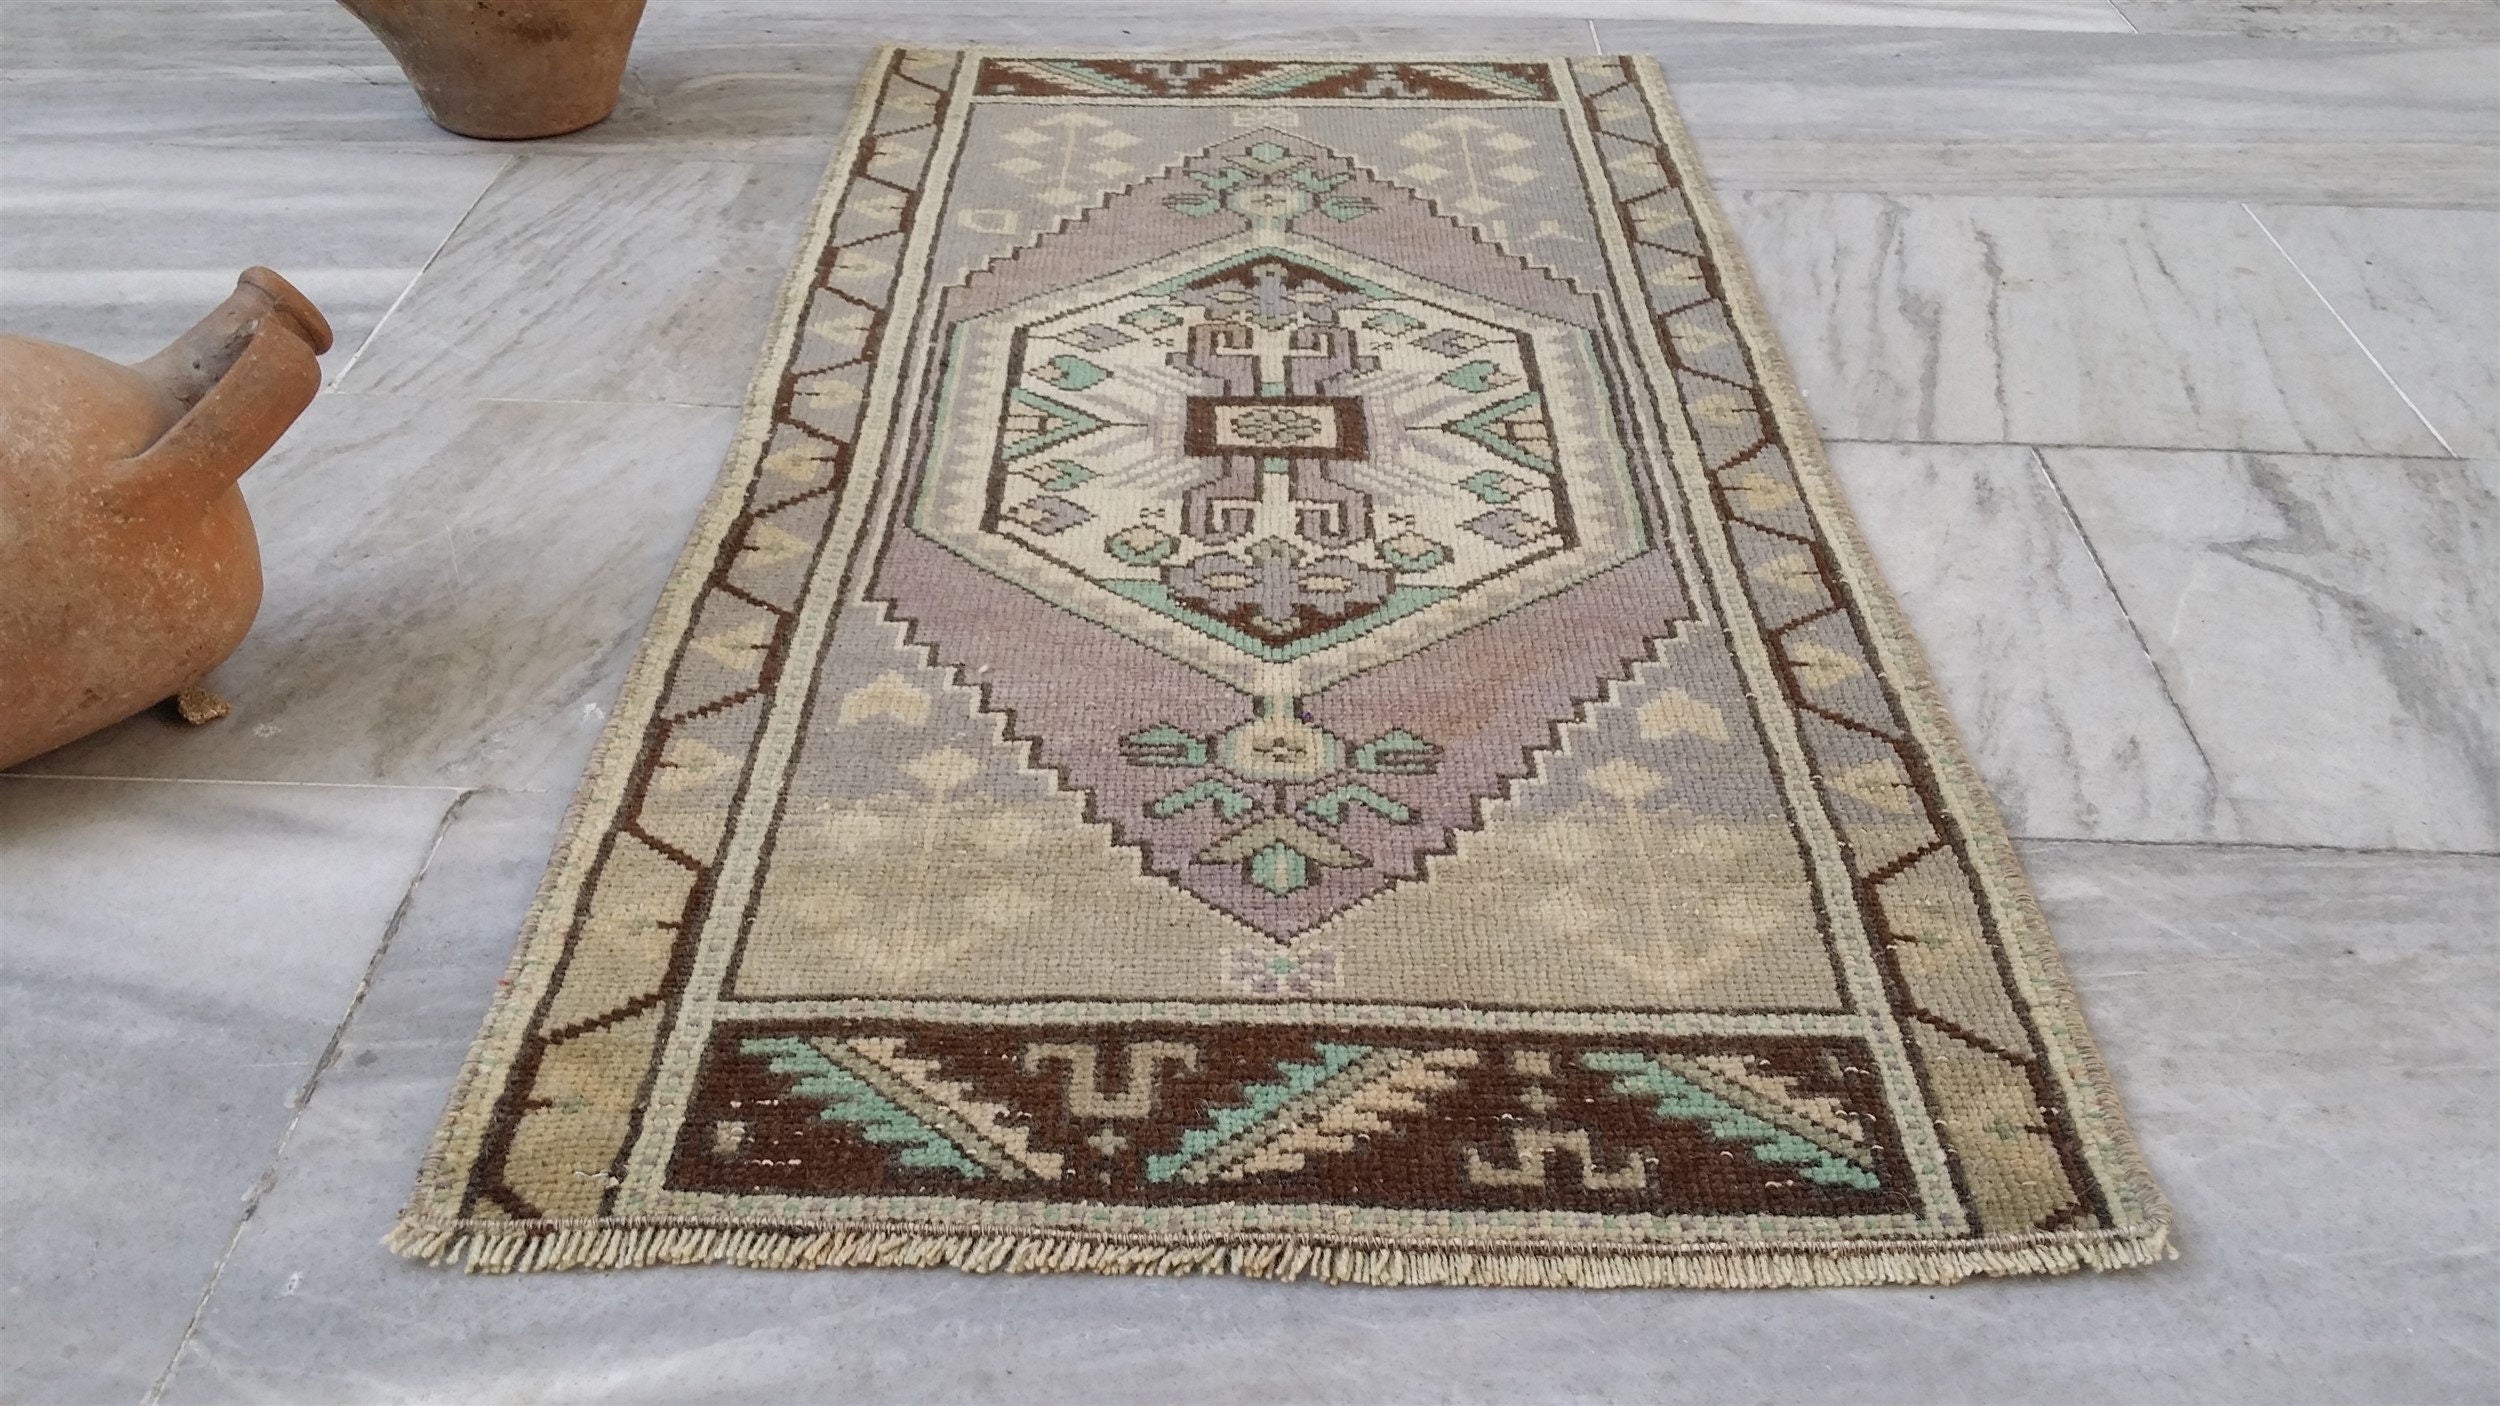 Vintage Turkish Small Rug, 3 ft 2 in x 1 ft 7 in, Pink, Green/Grey and Beige Faded Distressed Antique Style Mat